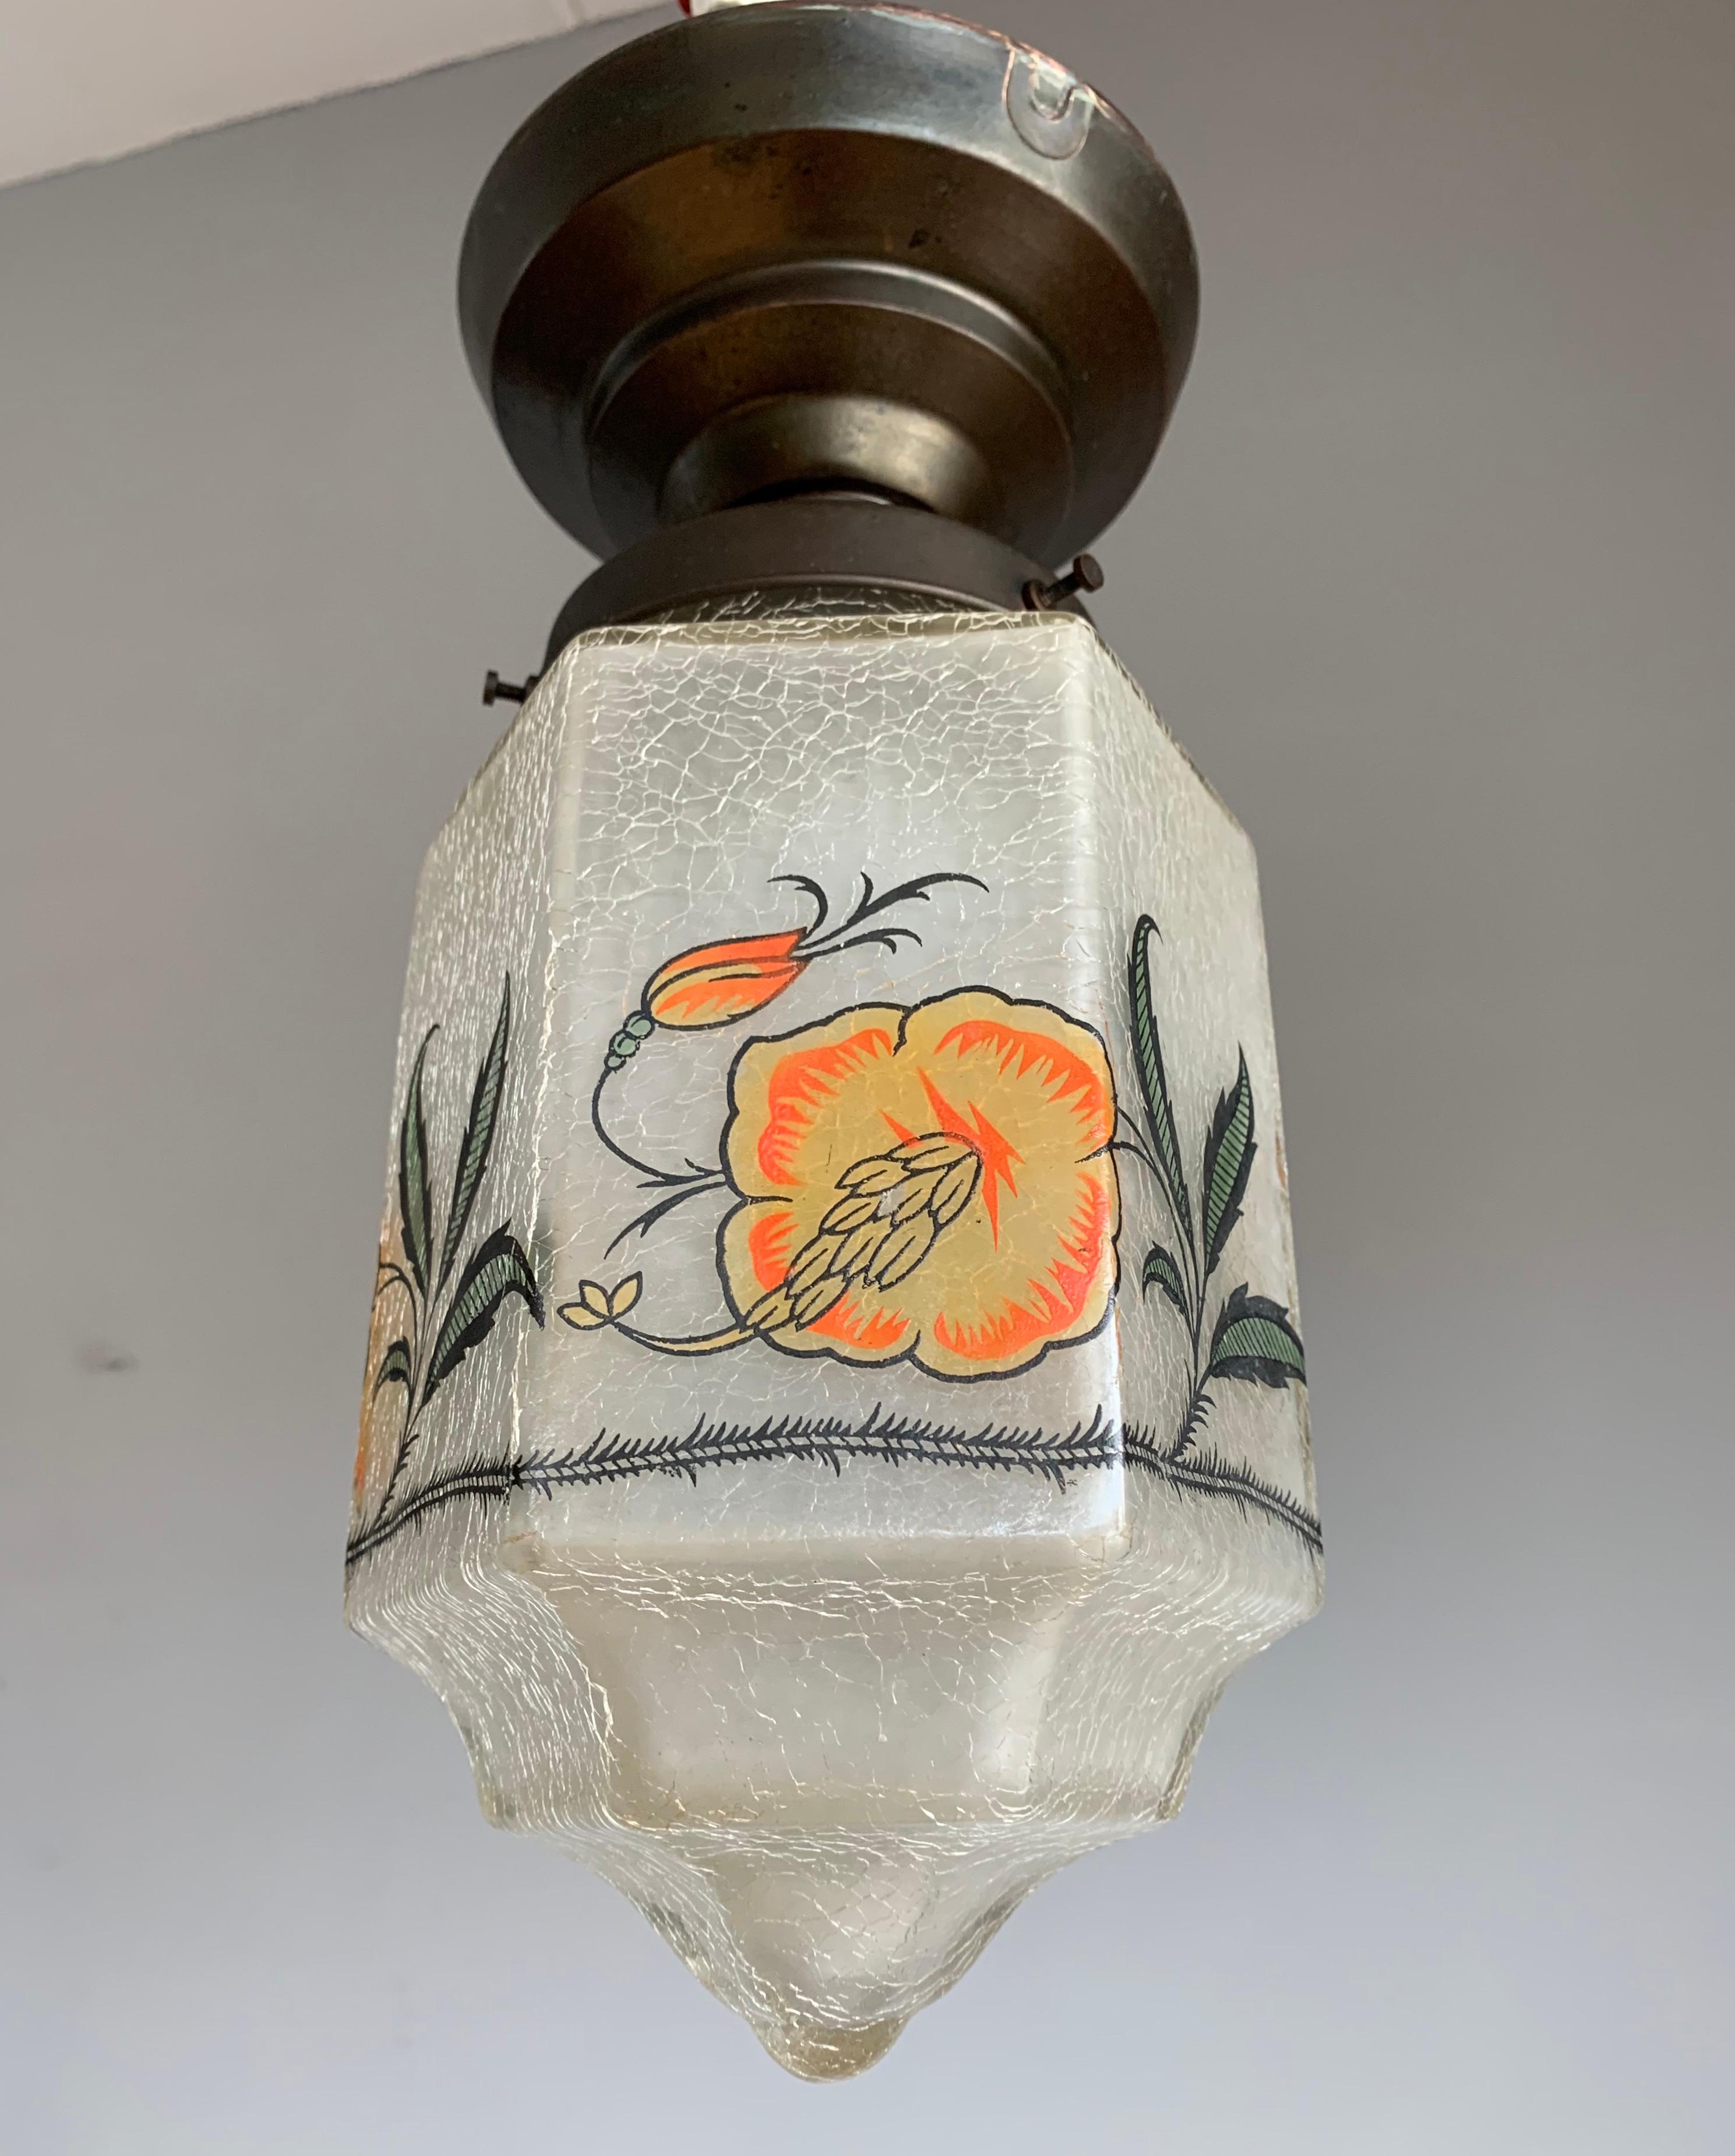 Very beautiful light fixture with a flower 'decor' in the finest of natural colors.

This rare, beautifully designed and very finely decorated pendant is destined to grace someone's entrance, landing or bedroom soon, because if you are looking for a